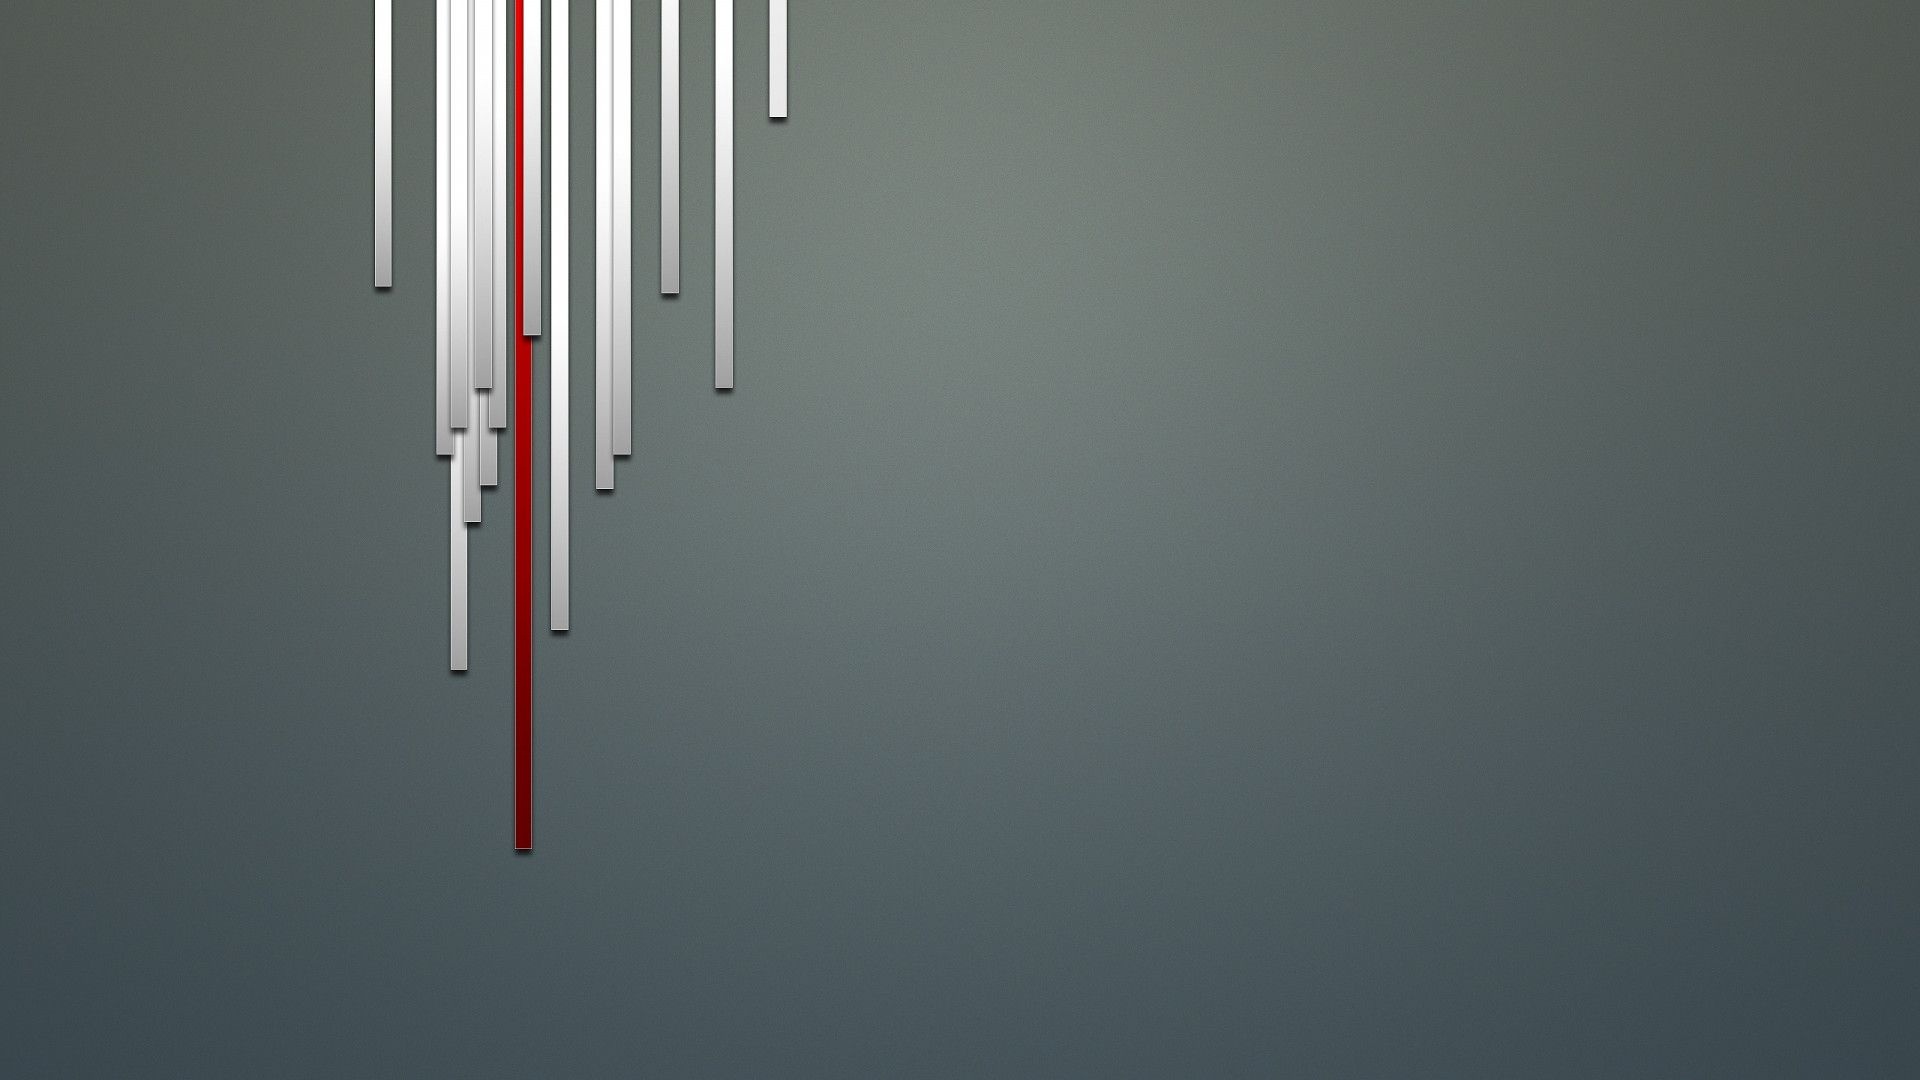 Kunst HD wallpaper, White and red lines, Abstract art, Minimalist design, 1920x1080 Full HD Desktop